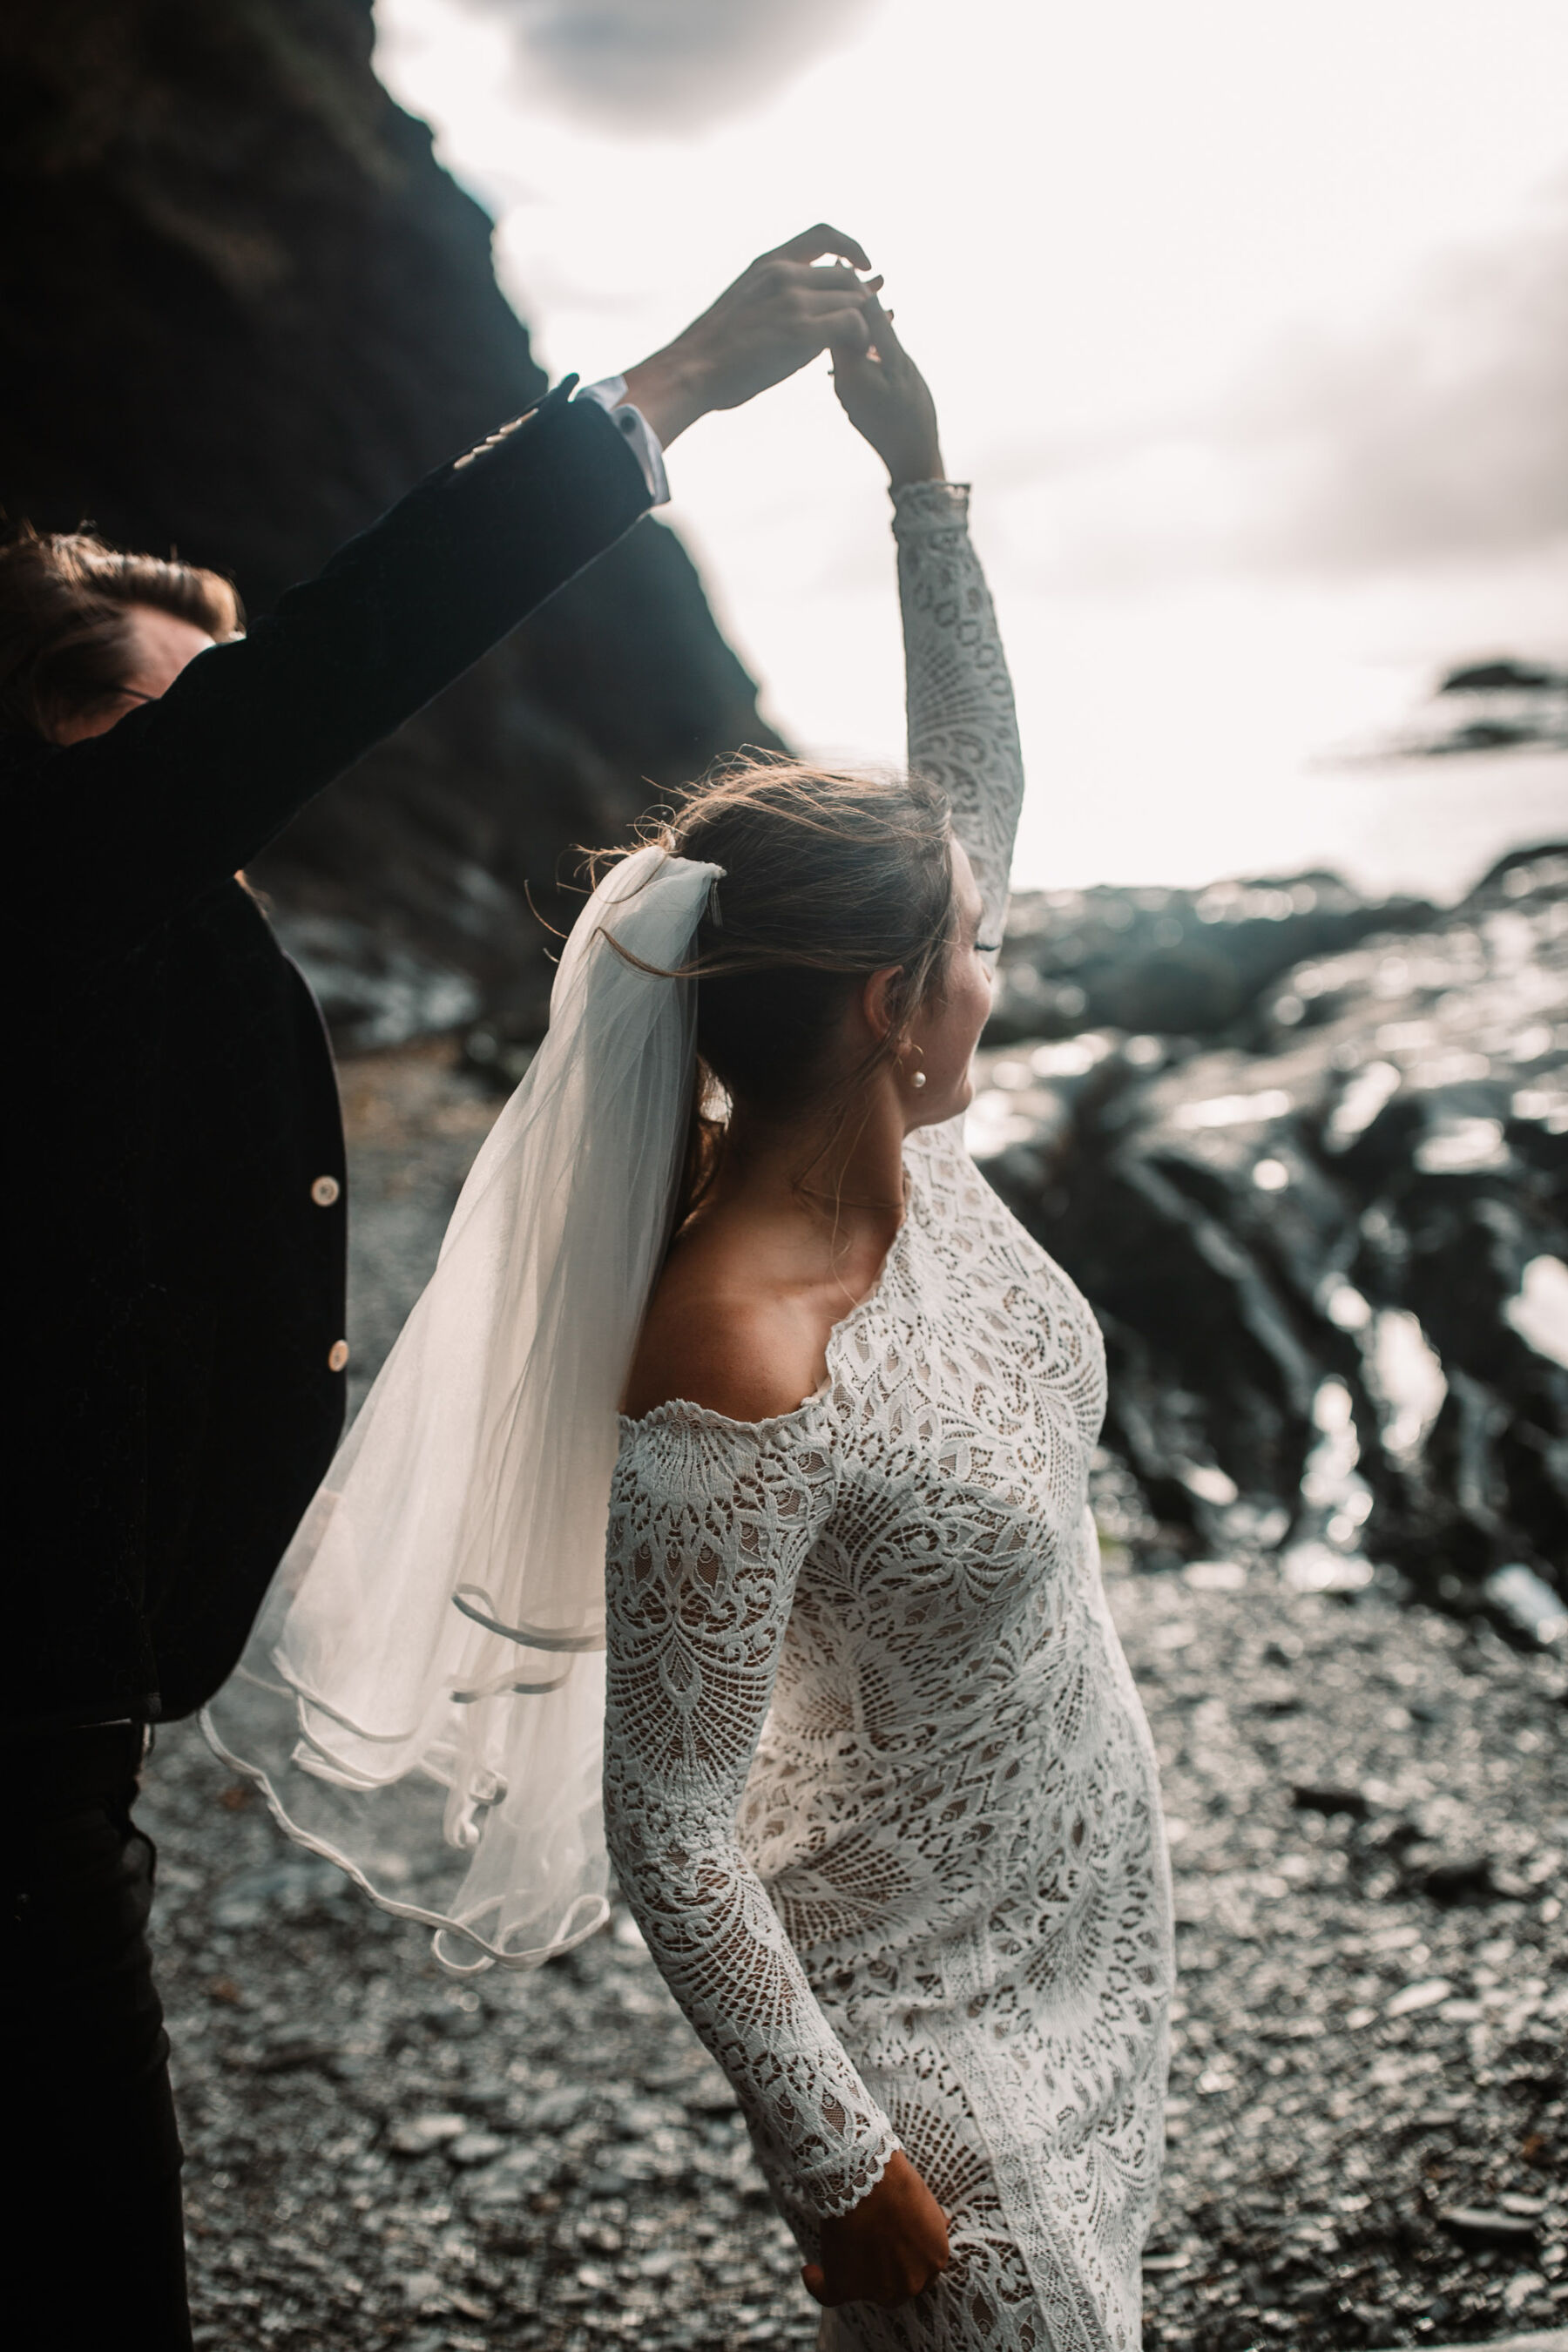 Bride and groom dancing on the beach t Tunnels Beaches wedding venue in Devon. Bride wears Grace Loves Lace.